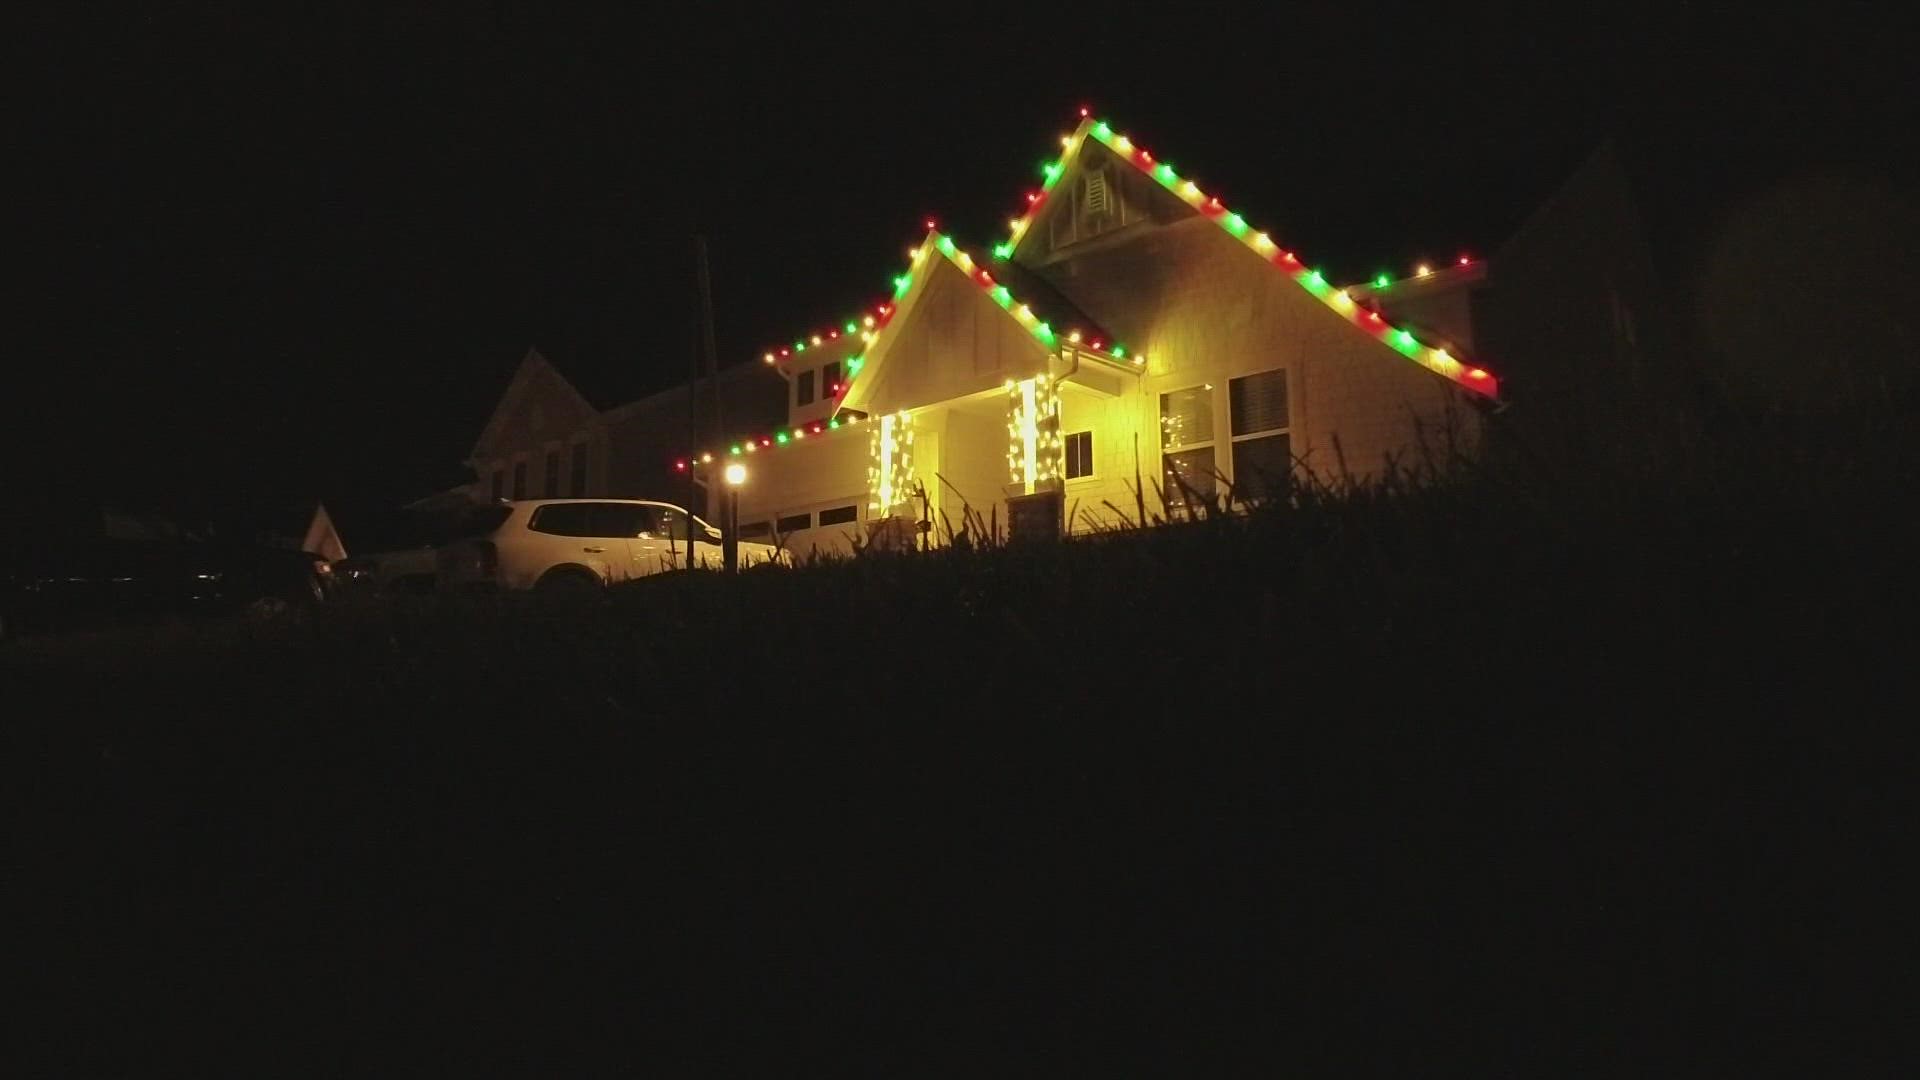 A few years ago, Michael Walker was helping to put Christmas lights on a friend’s house. He then thought of a business idea that was sparked by brotherhood.